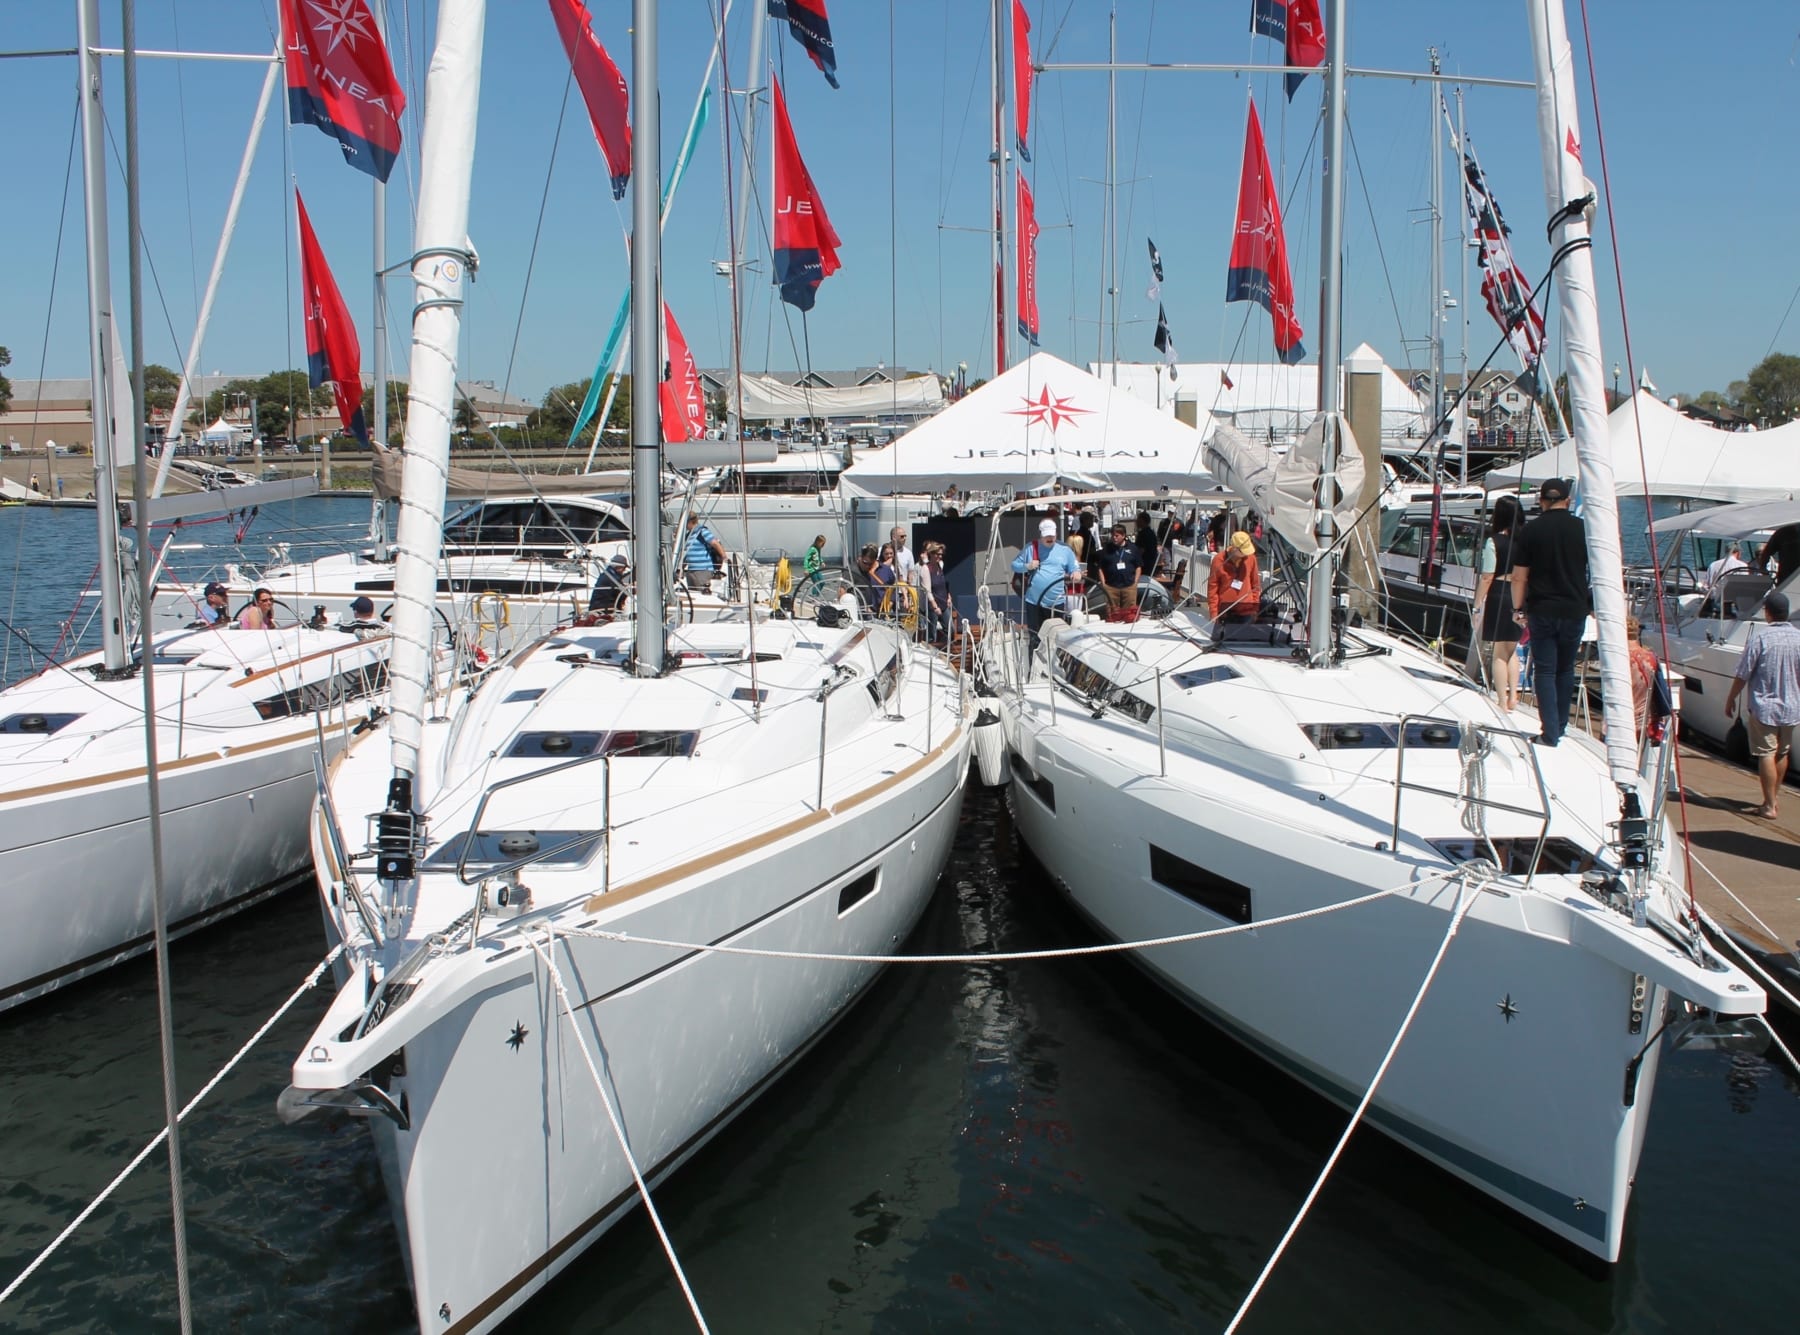 Boats for every budget and dream at the boat show’s in-water displays